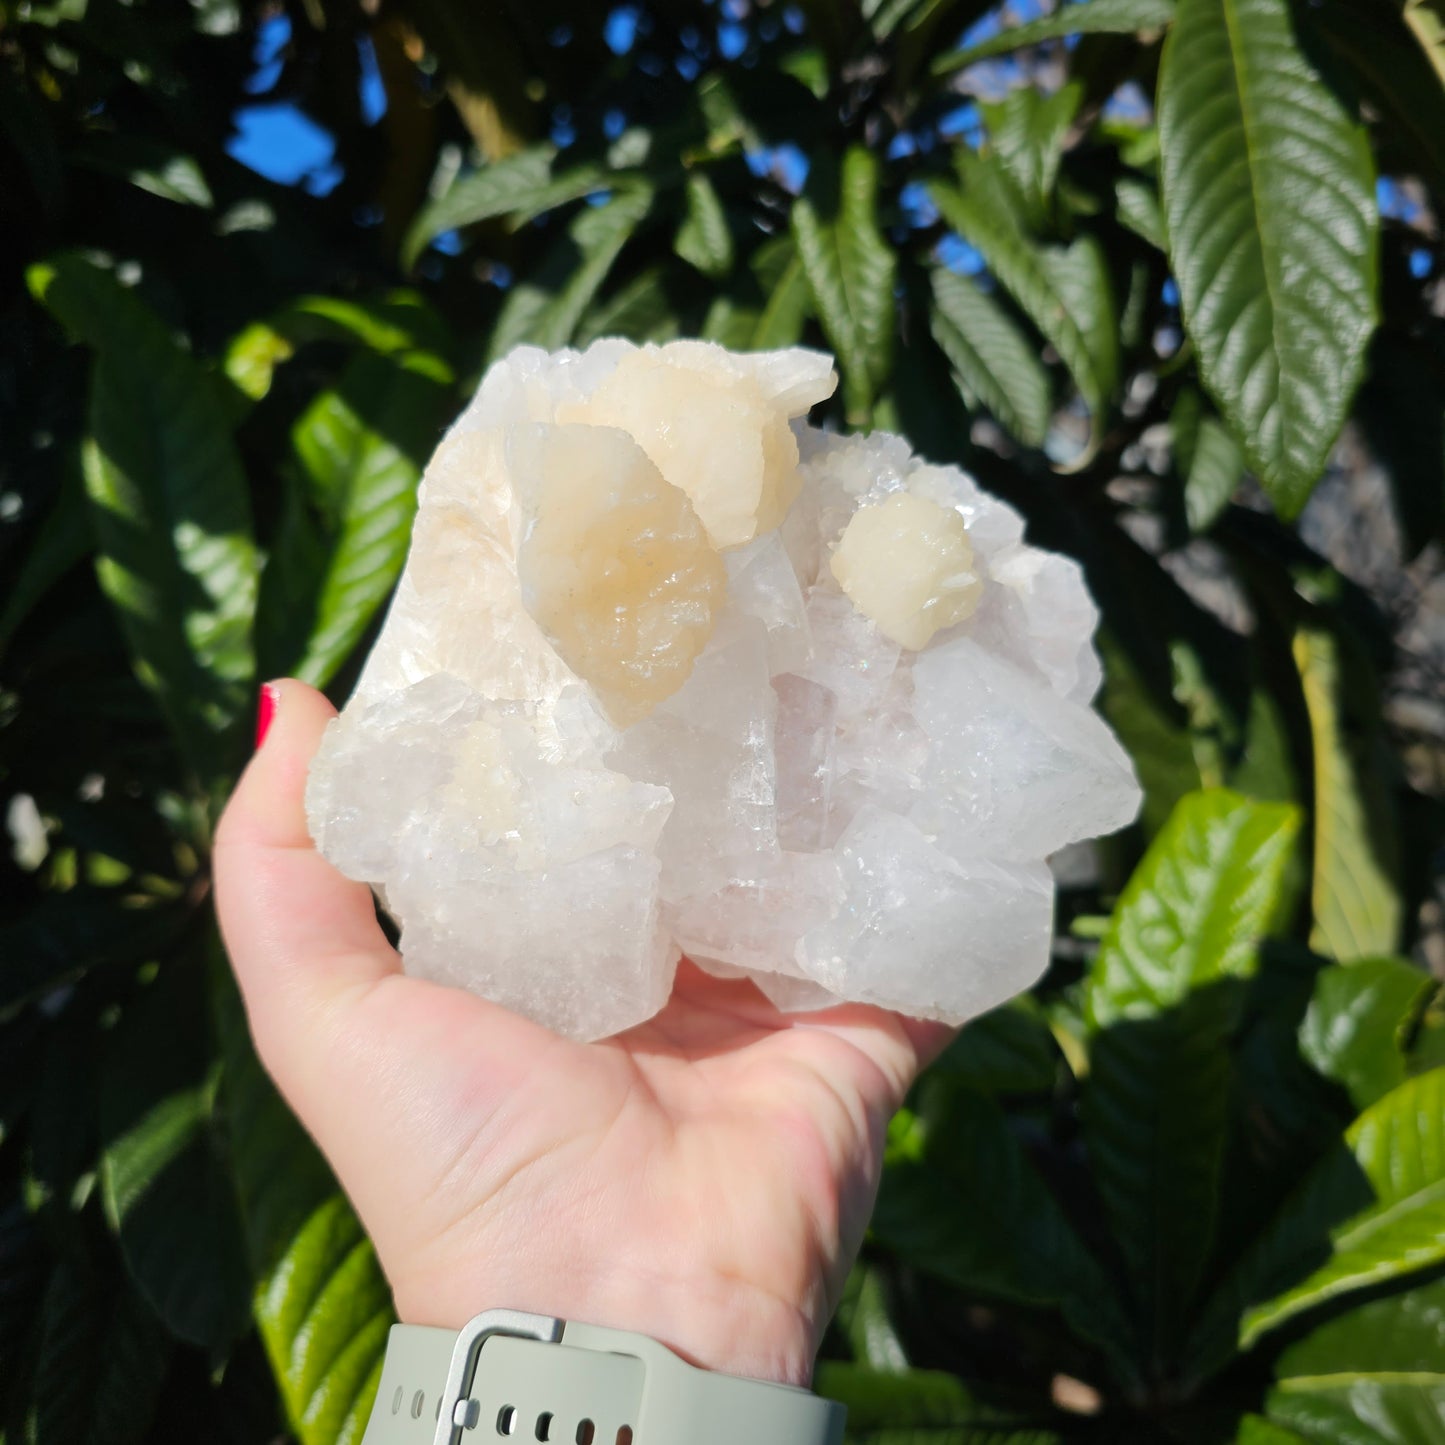 Apophyllite & Stilbite specimen with beautiful rainbows.  Approx. 7.5 x 13 x 12.5  Approx. 987g | Birthday Gifts, Anniversary Gifts, Valentine's Day, Christmas, Easter, Eid, Mother's Day, Diwali, Hannukah, Women's, Girl's, Gifts for her, Gifts for Girlfriend, Gifts for Mom, Gifts for Mum, Gifts for Friend, Handmade Gifts, Handmade Jewelry, New Year's Eve, Graduation, Boho, Hippie, Minimalist, Gemstone, Crystal, Crystal Healing